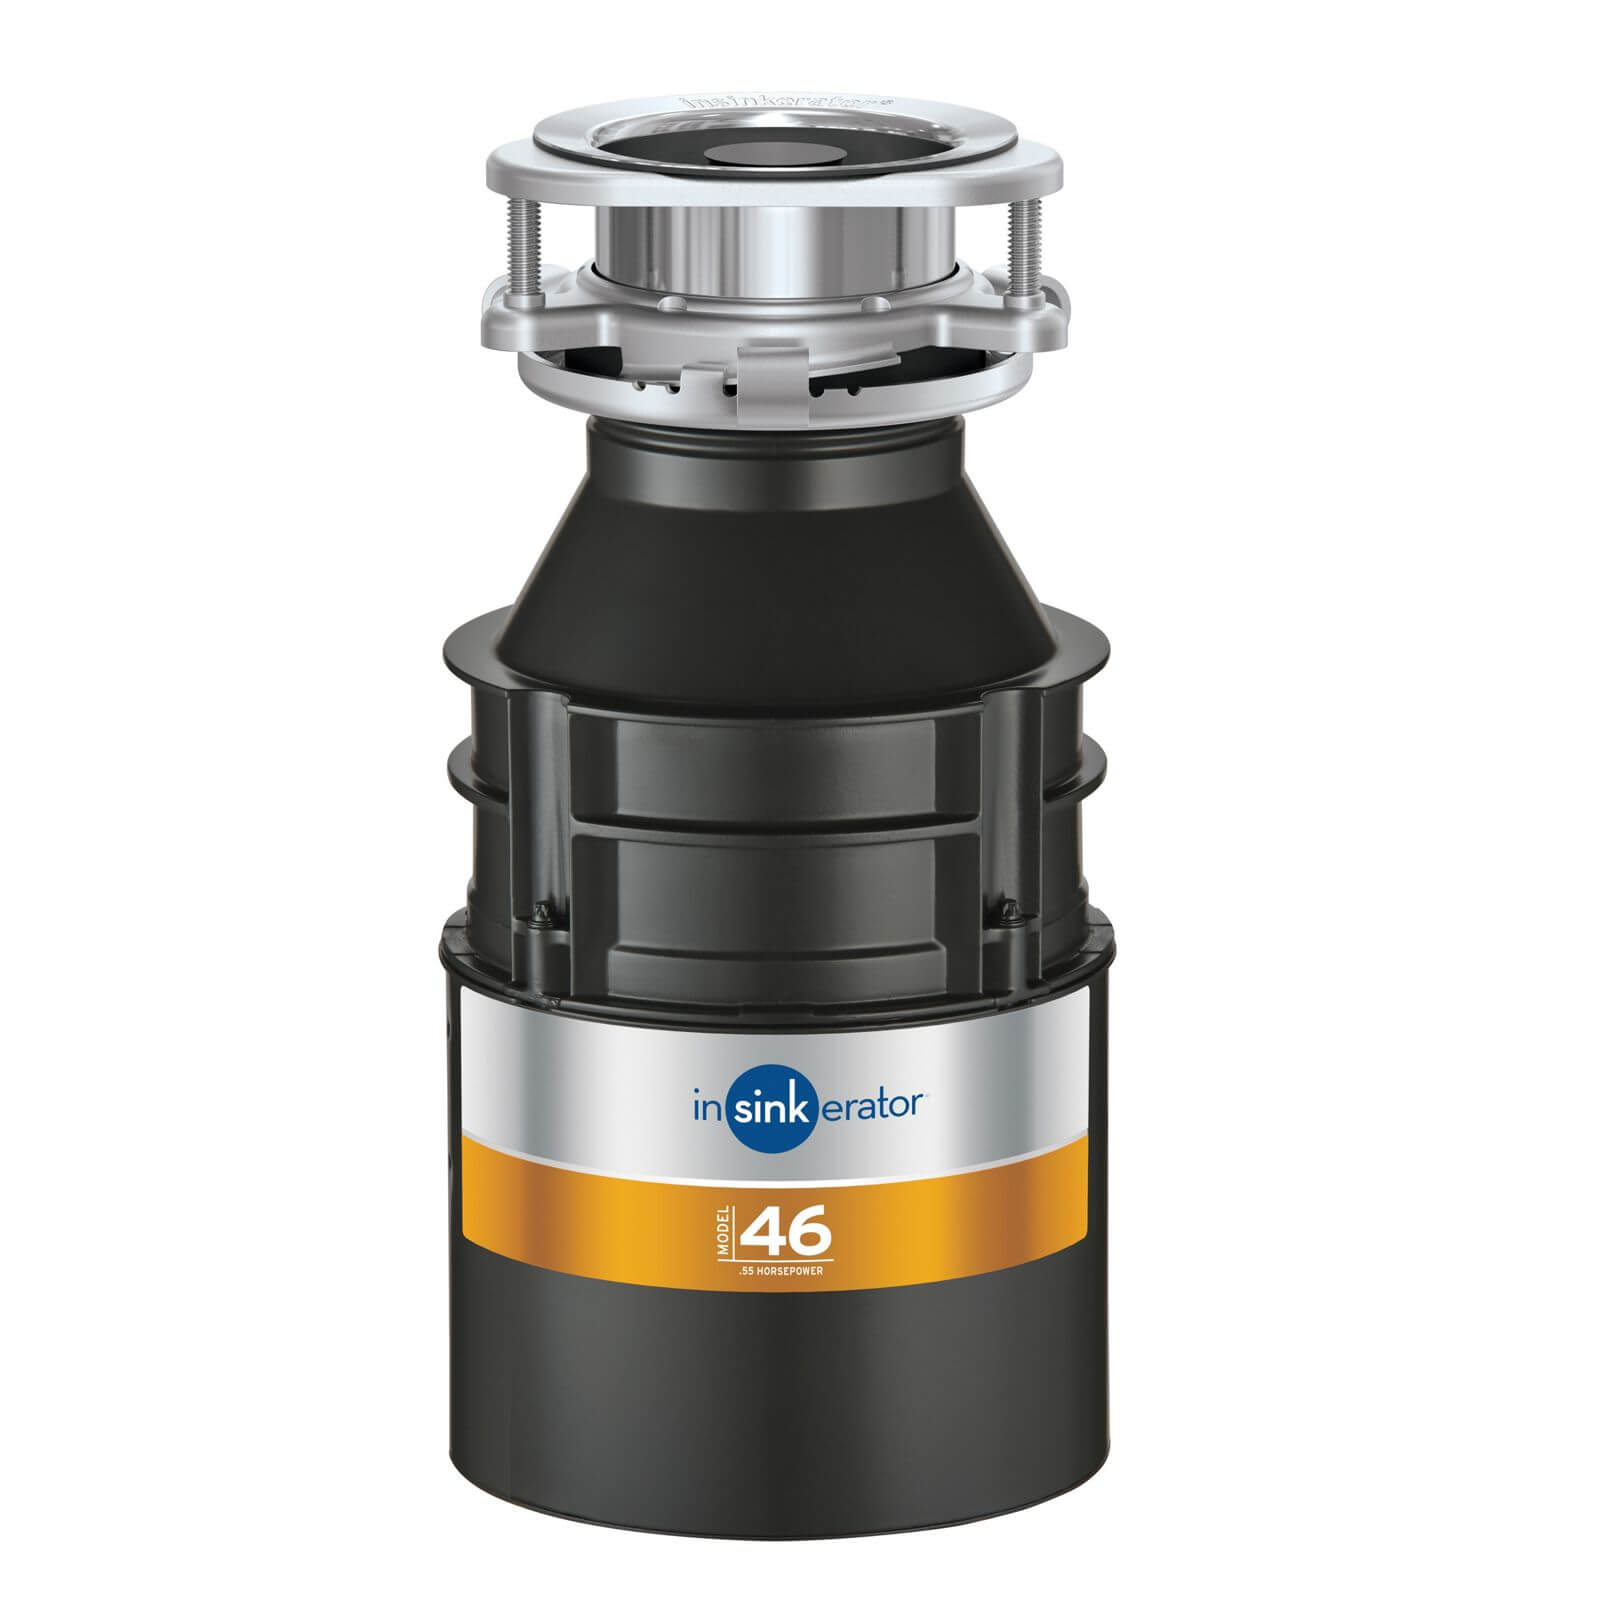 InSinkErator Model 46AS Compact Food Waste Disposer